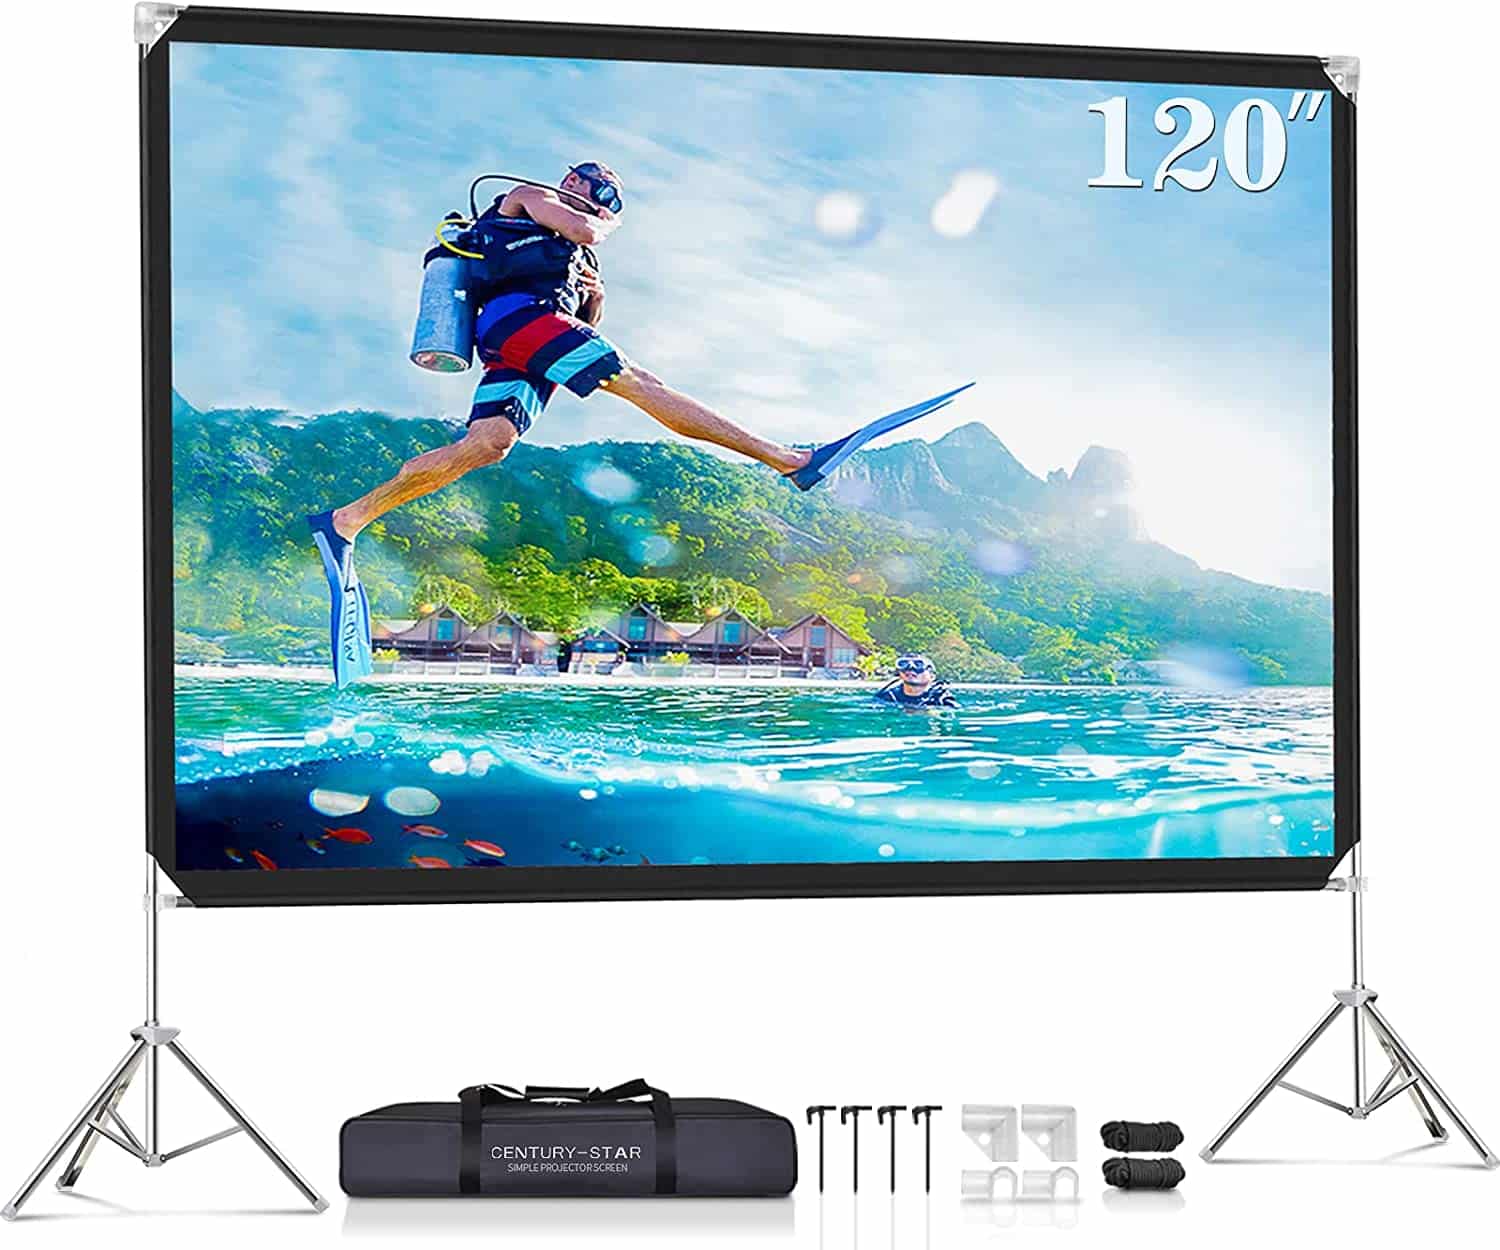 Projector Screen and Stand, 120-inch CENTURY-STAR Outdoor Movie Screen Wrinkle-Free Nylon 16-9 Outdoor Projector Screen, Portable Video Projection Screen